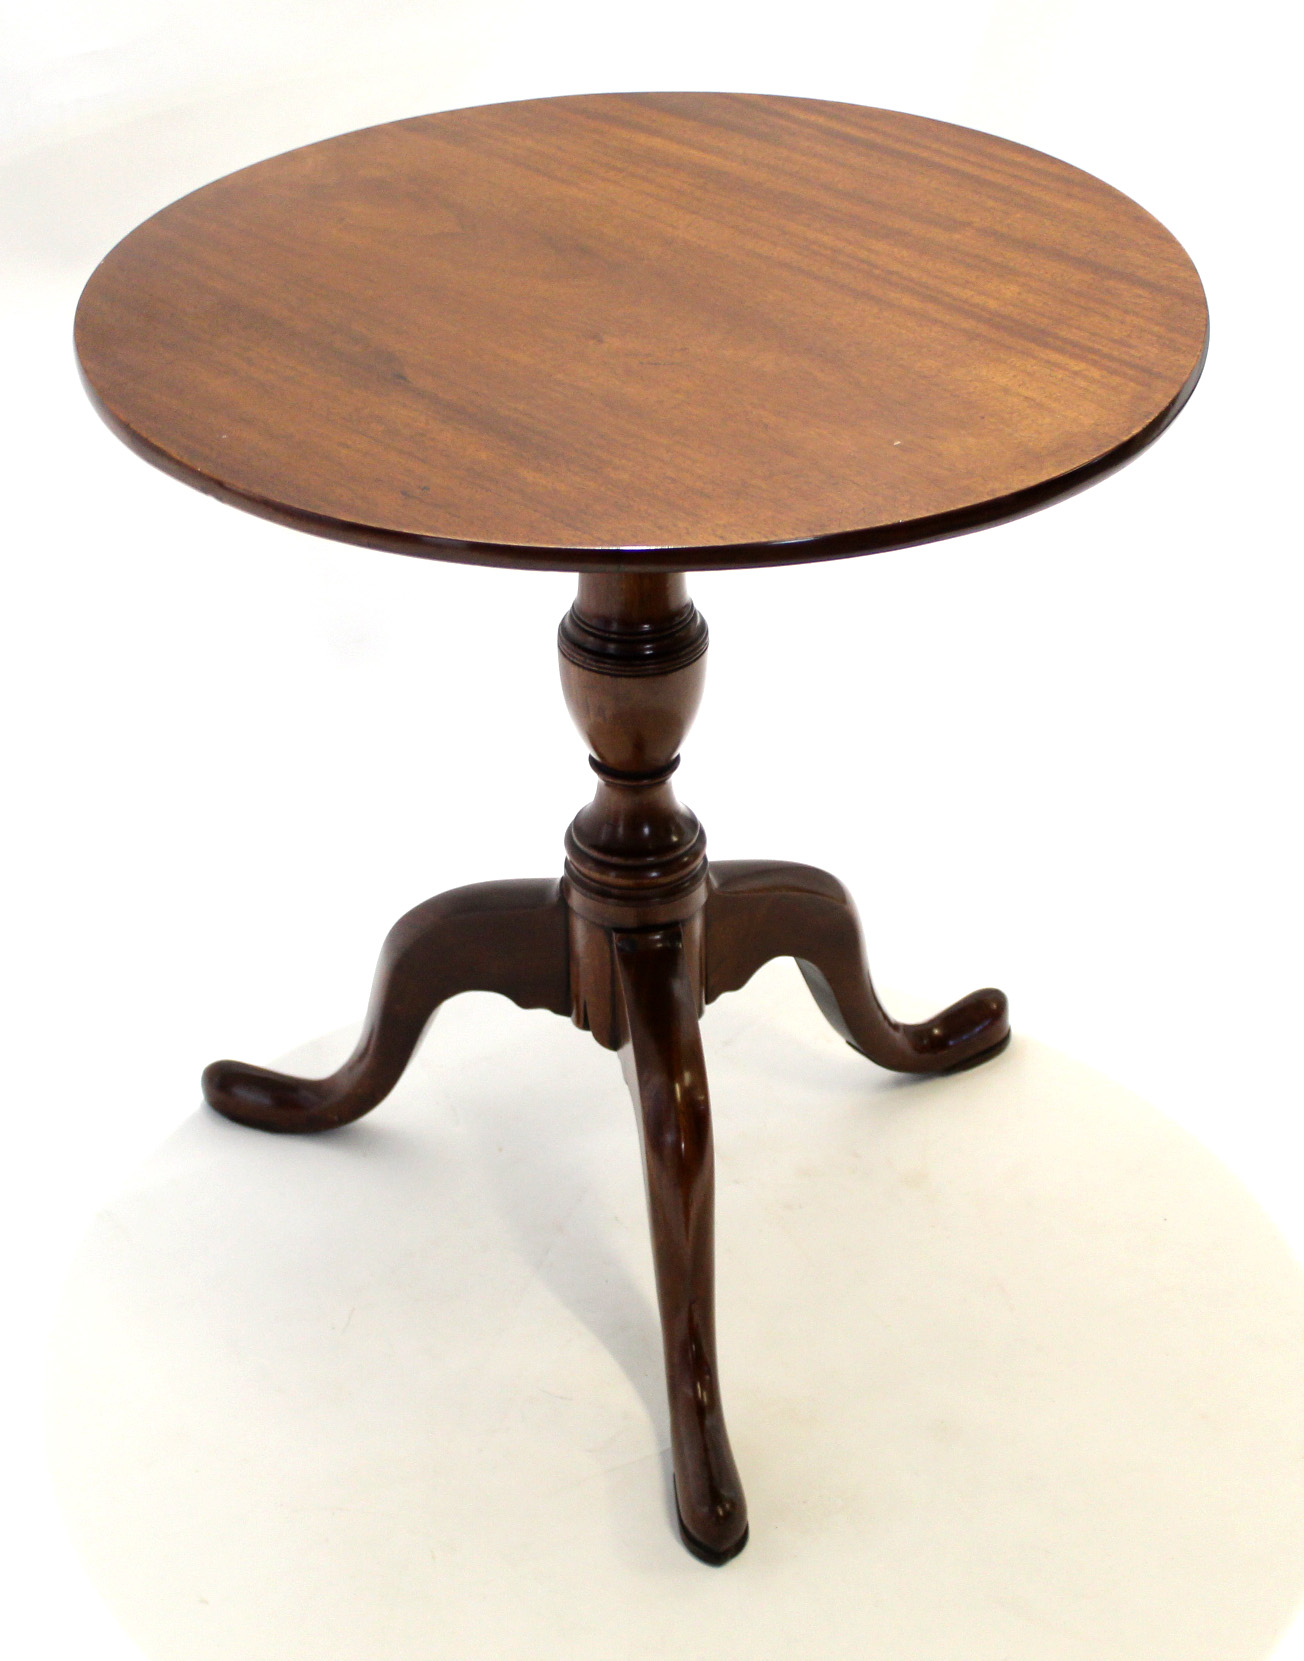 19th century mahogany circular top tilt top table with turned column on a splayed tripod base,